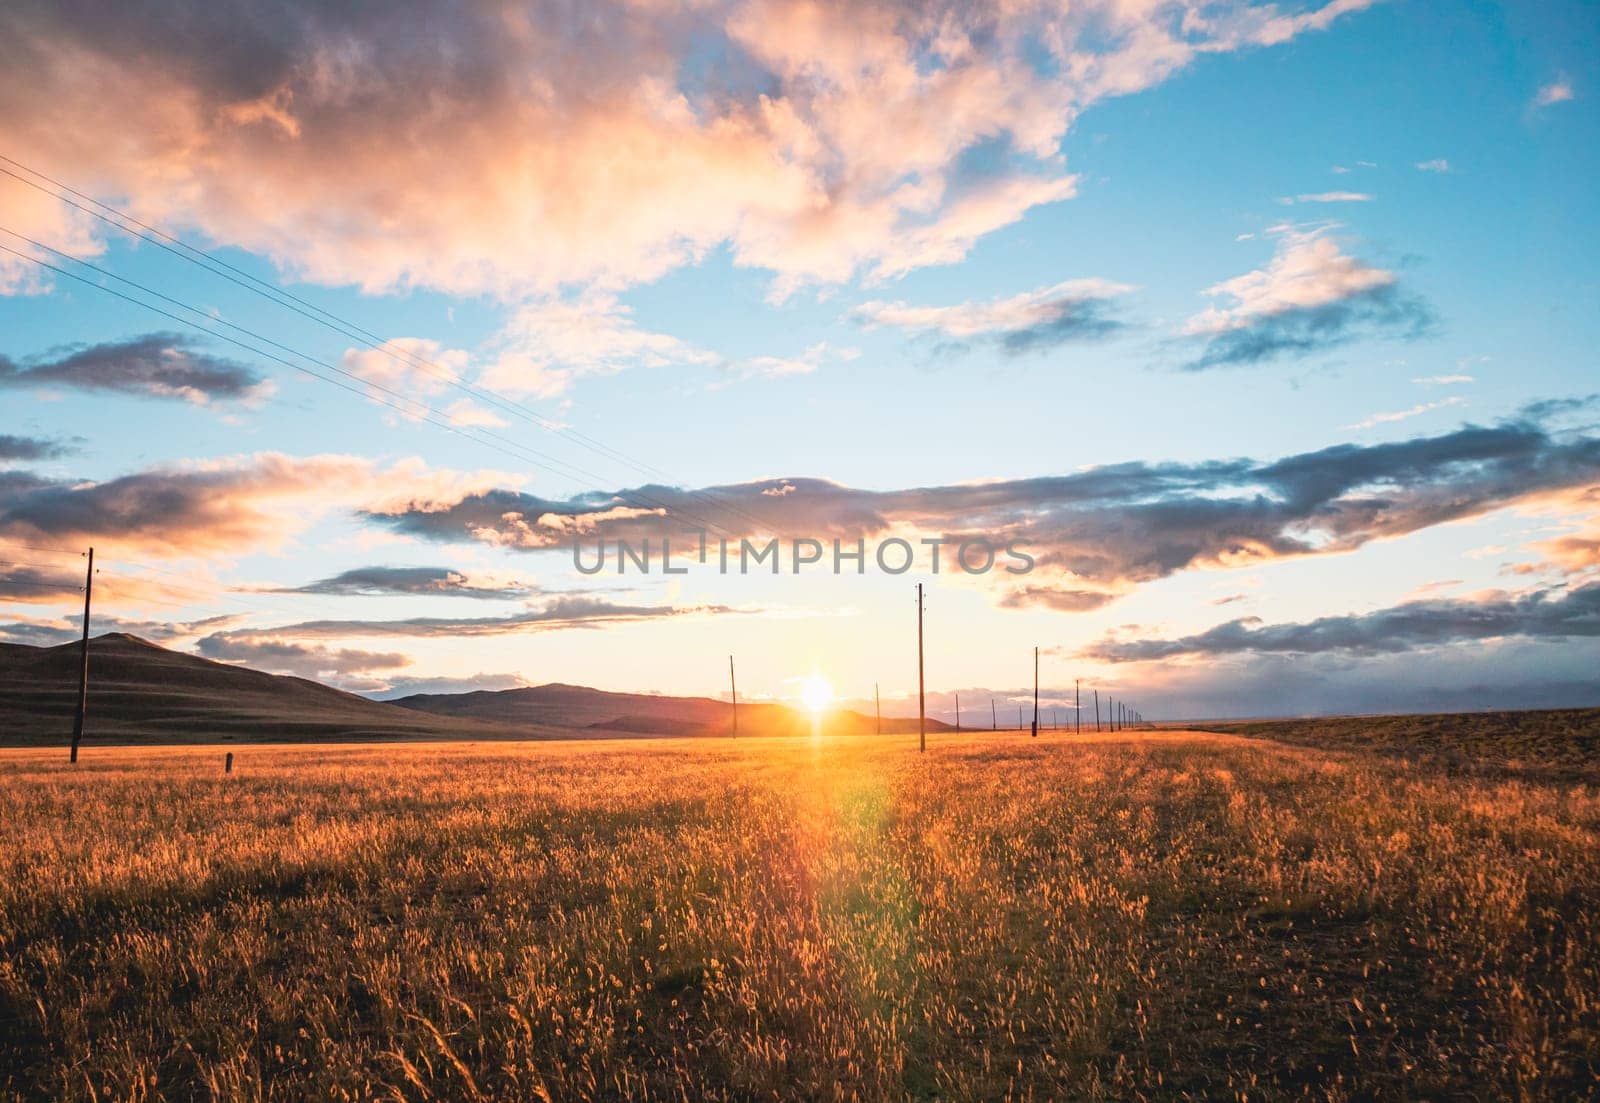 Stunning rural landscape. Sunset over the golden wheat field. Blue sky with dramatic clouds at sunset. Sun sets down. Summer.